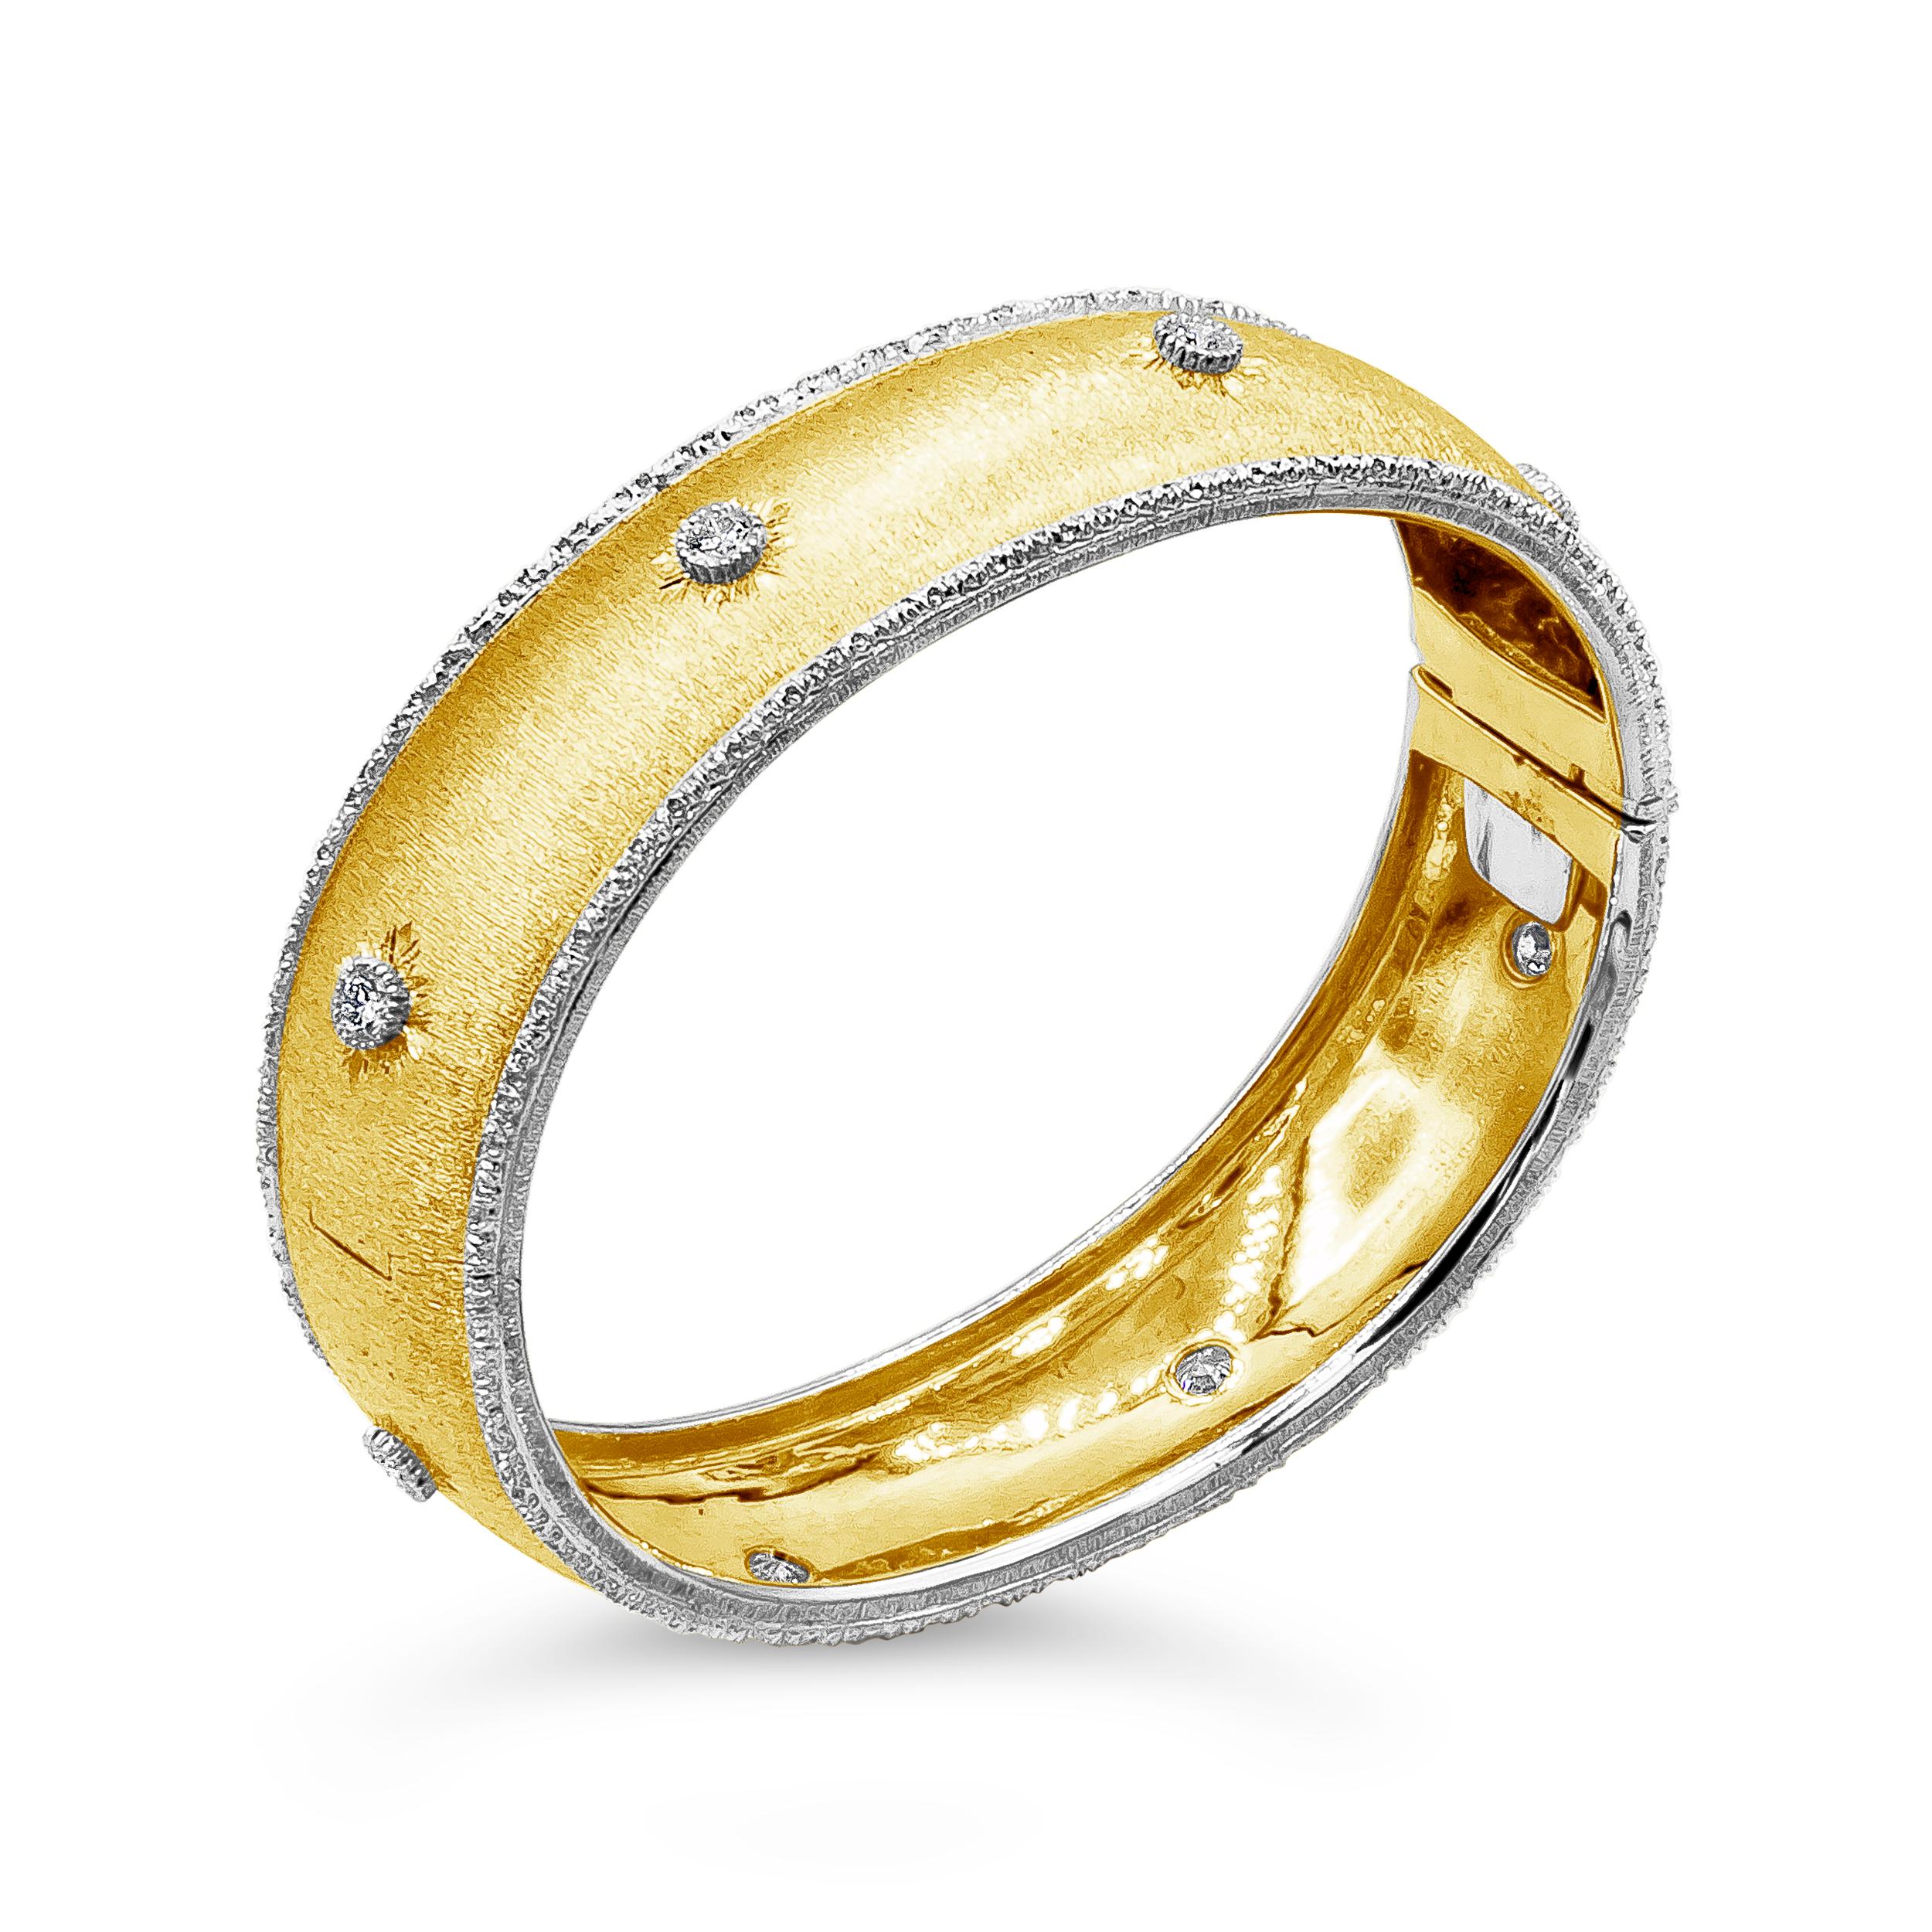 A fashionable and antique bangle bracelet showcasing 1.00 carats total a brushed and domed yellow gold finish accented with round brilliant diamonds spaced evenly throughout the bracelet.

Style available in different price ranges. Prices are based